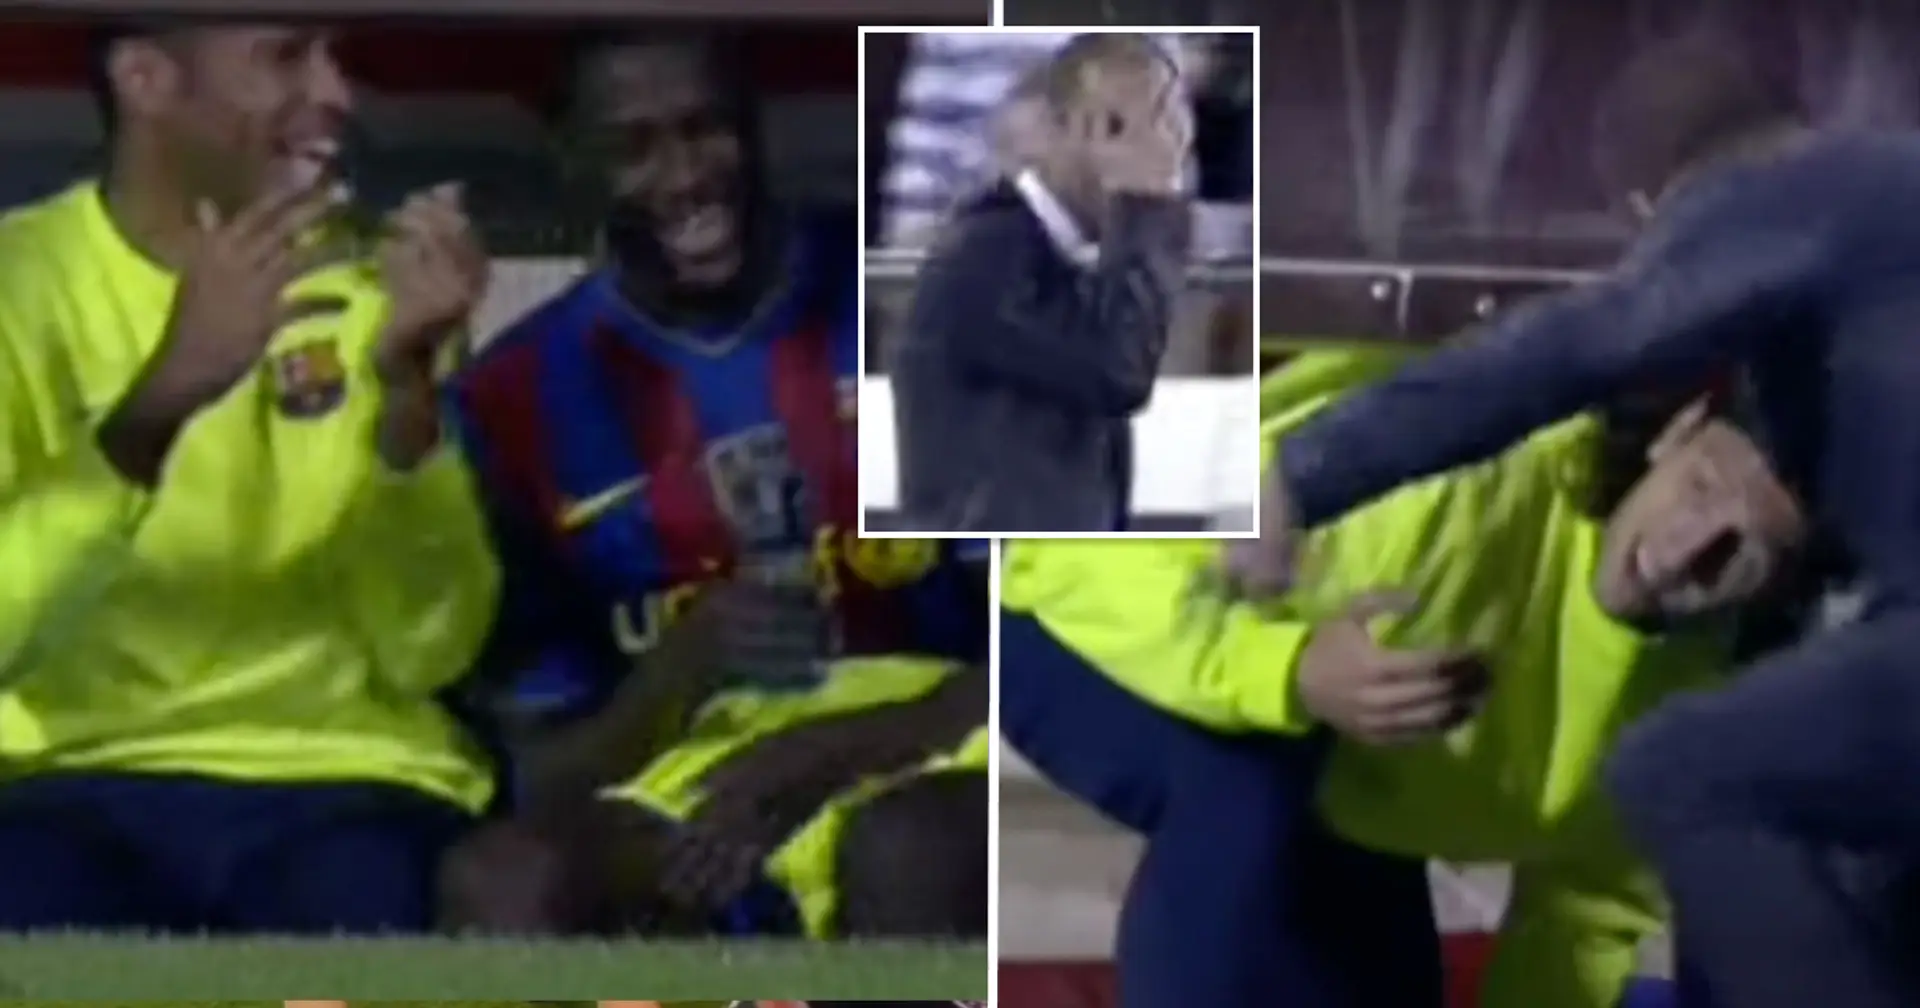 Recalling how Chyhrynskyi refused to come on the pitch and got Barca bench giggling at Guardiola